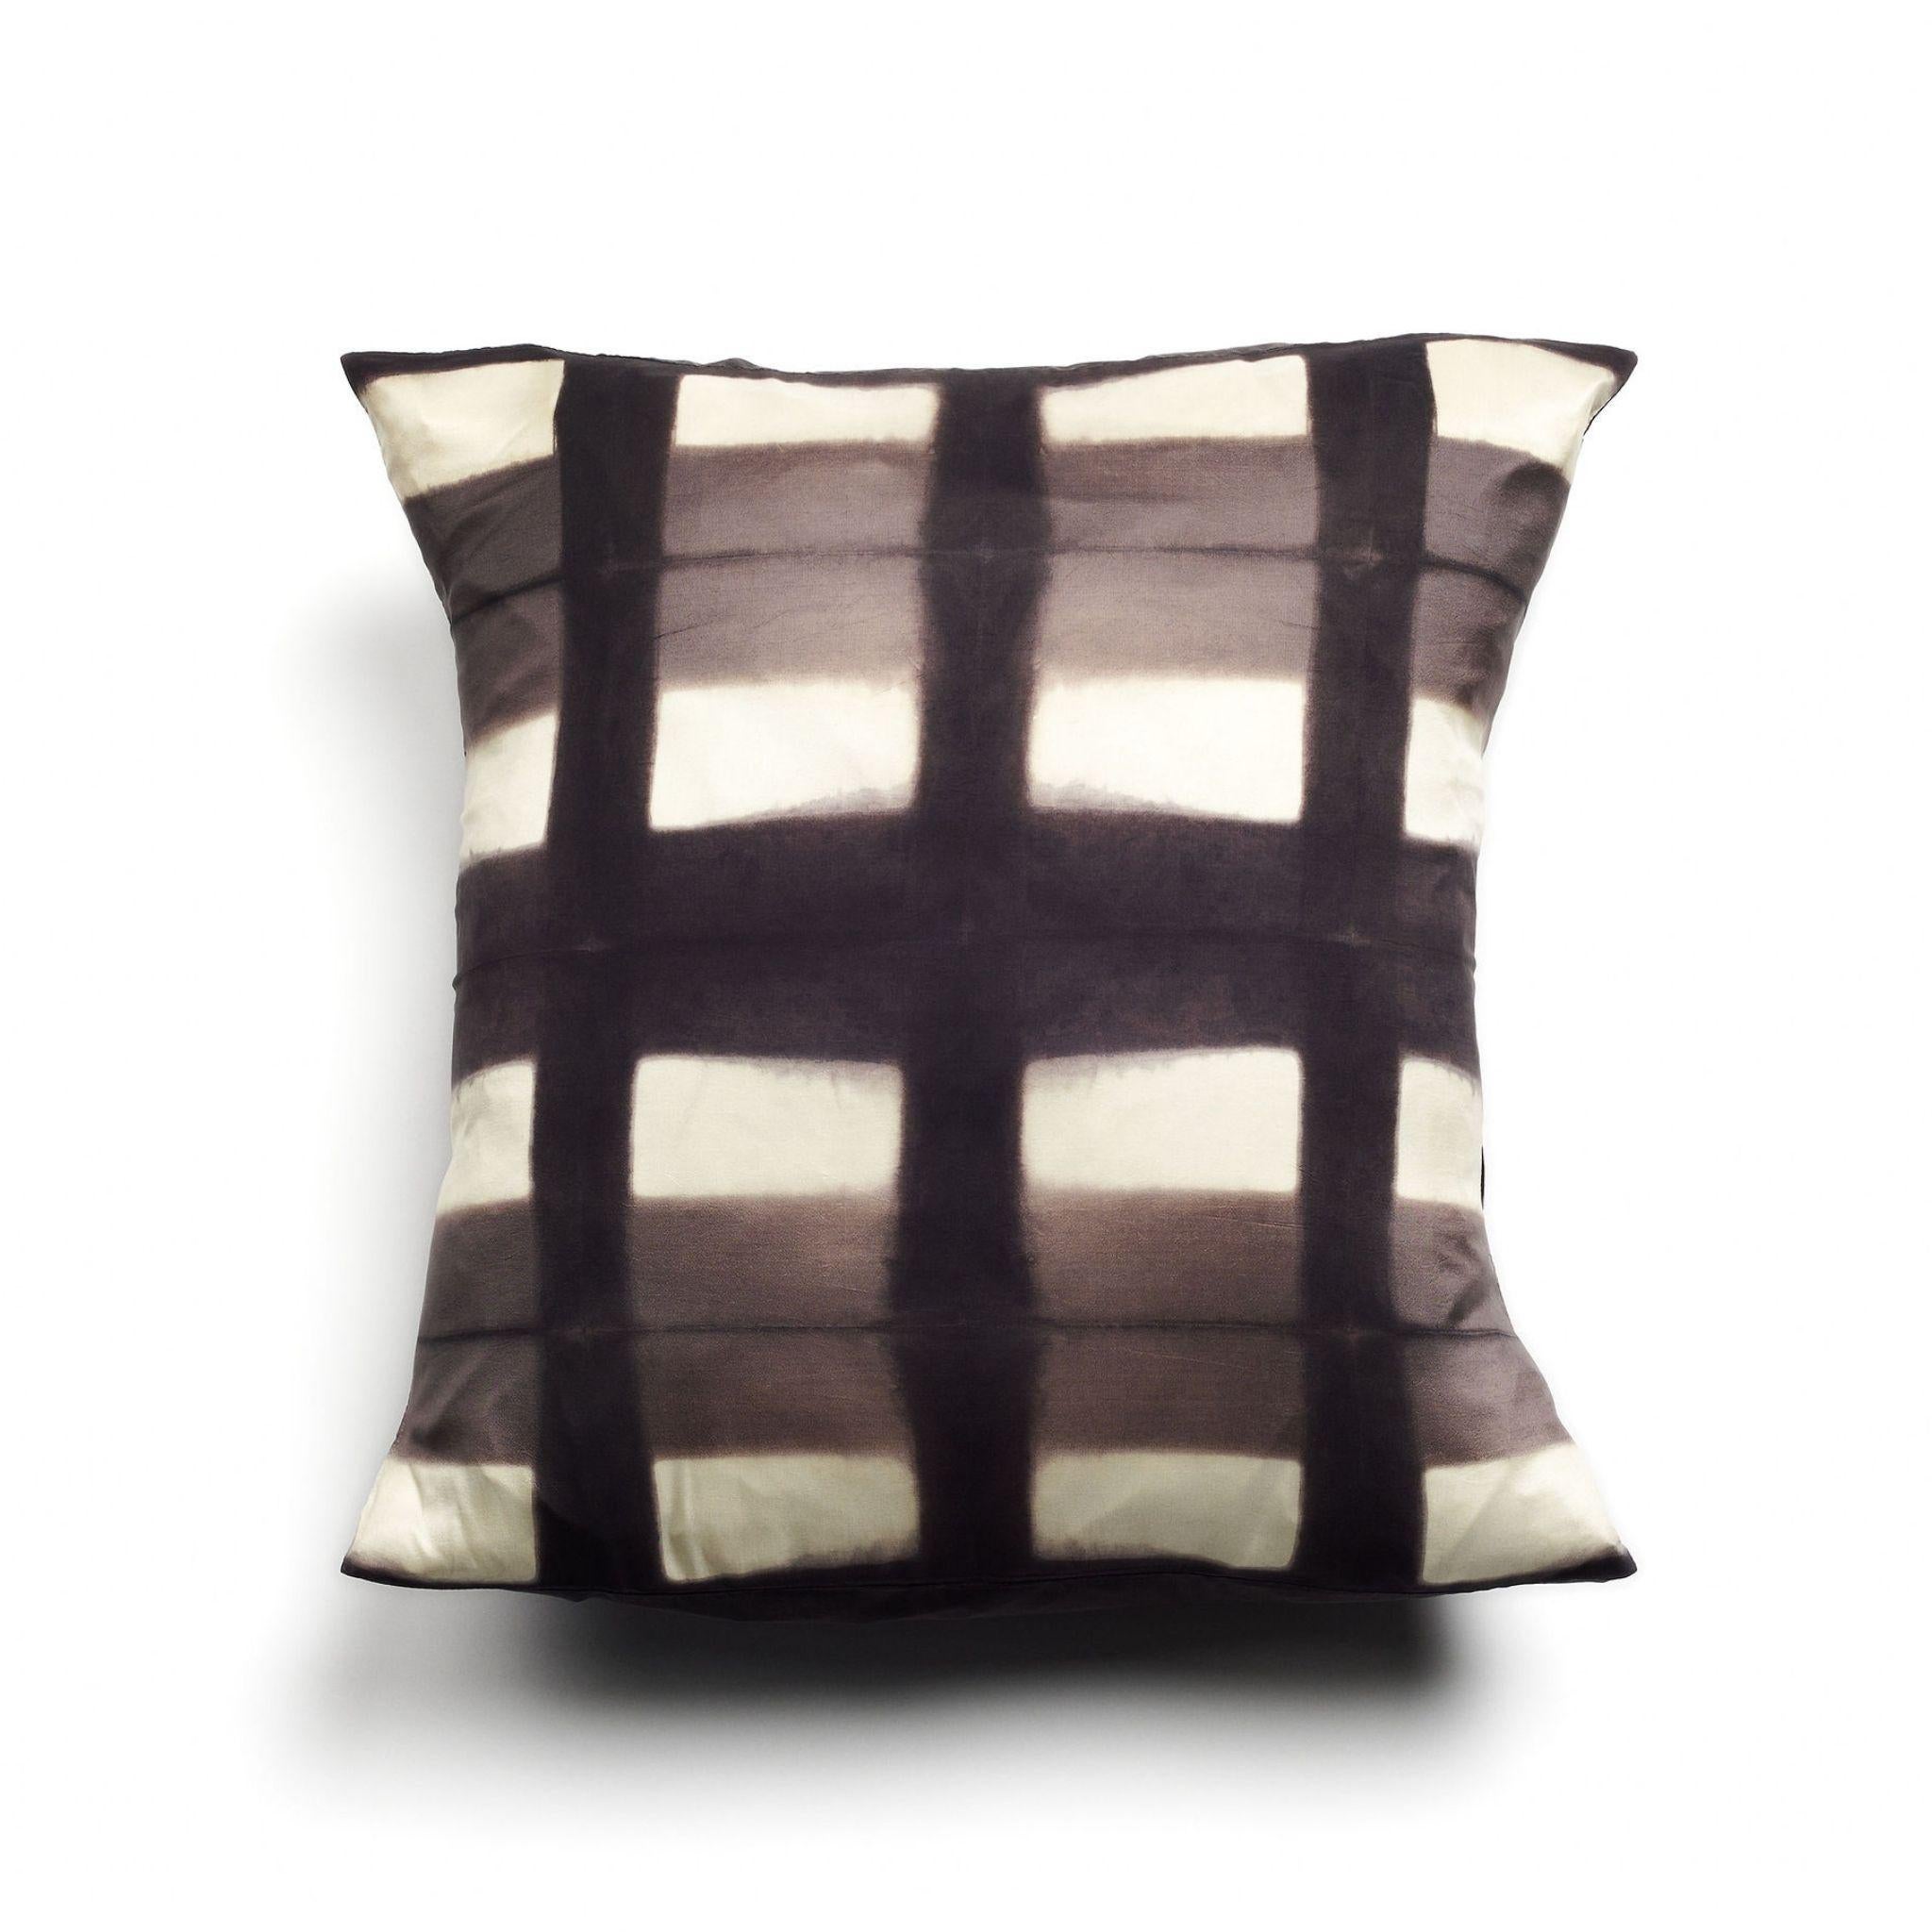 Dyed Melo Black Silk Pillow In Geometric Pattern, Handcrafted By Artisans  For Sale